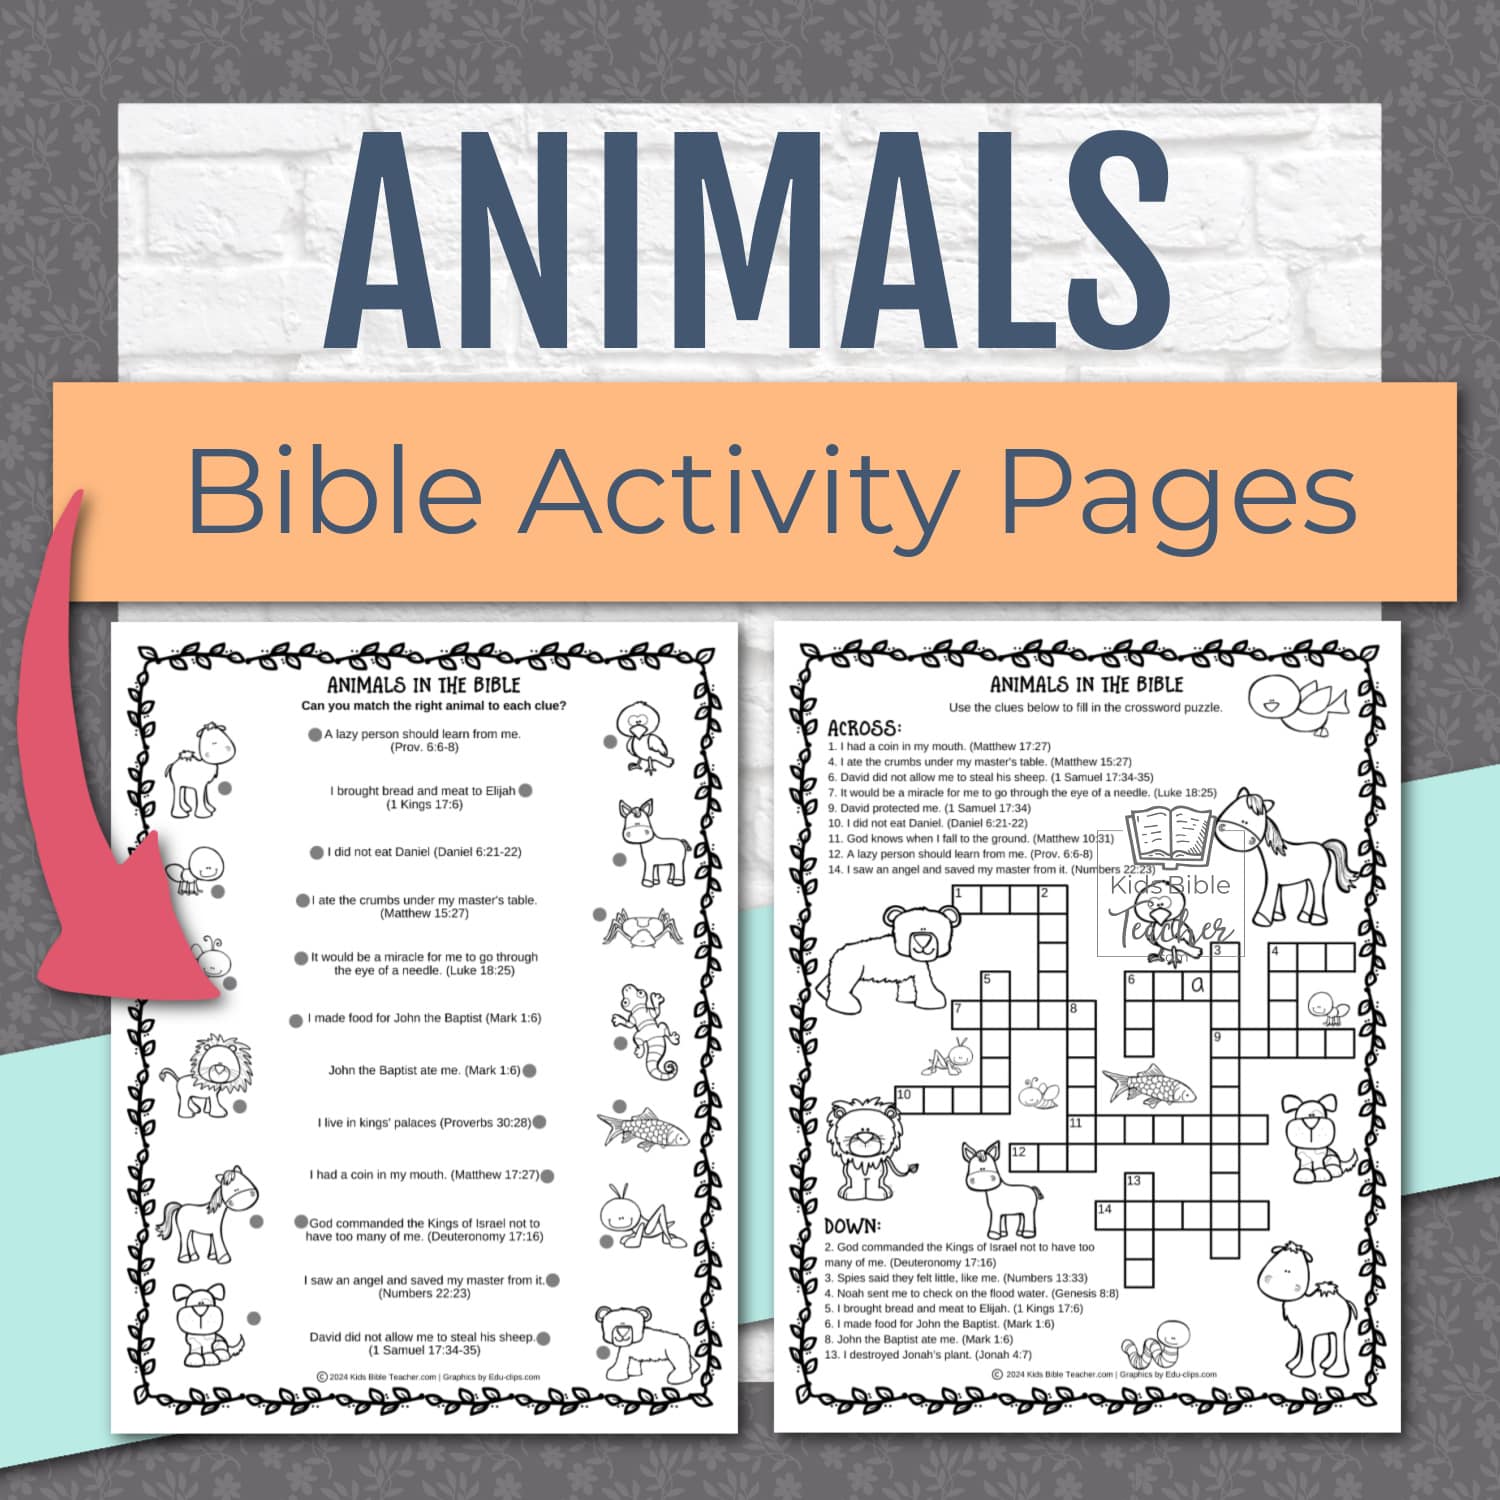 Animals in the Bible Activity Pages for Kids Bible Worksheets for Kids with Bible verses